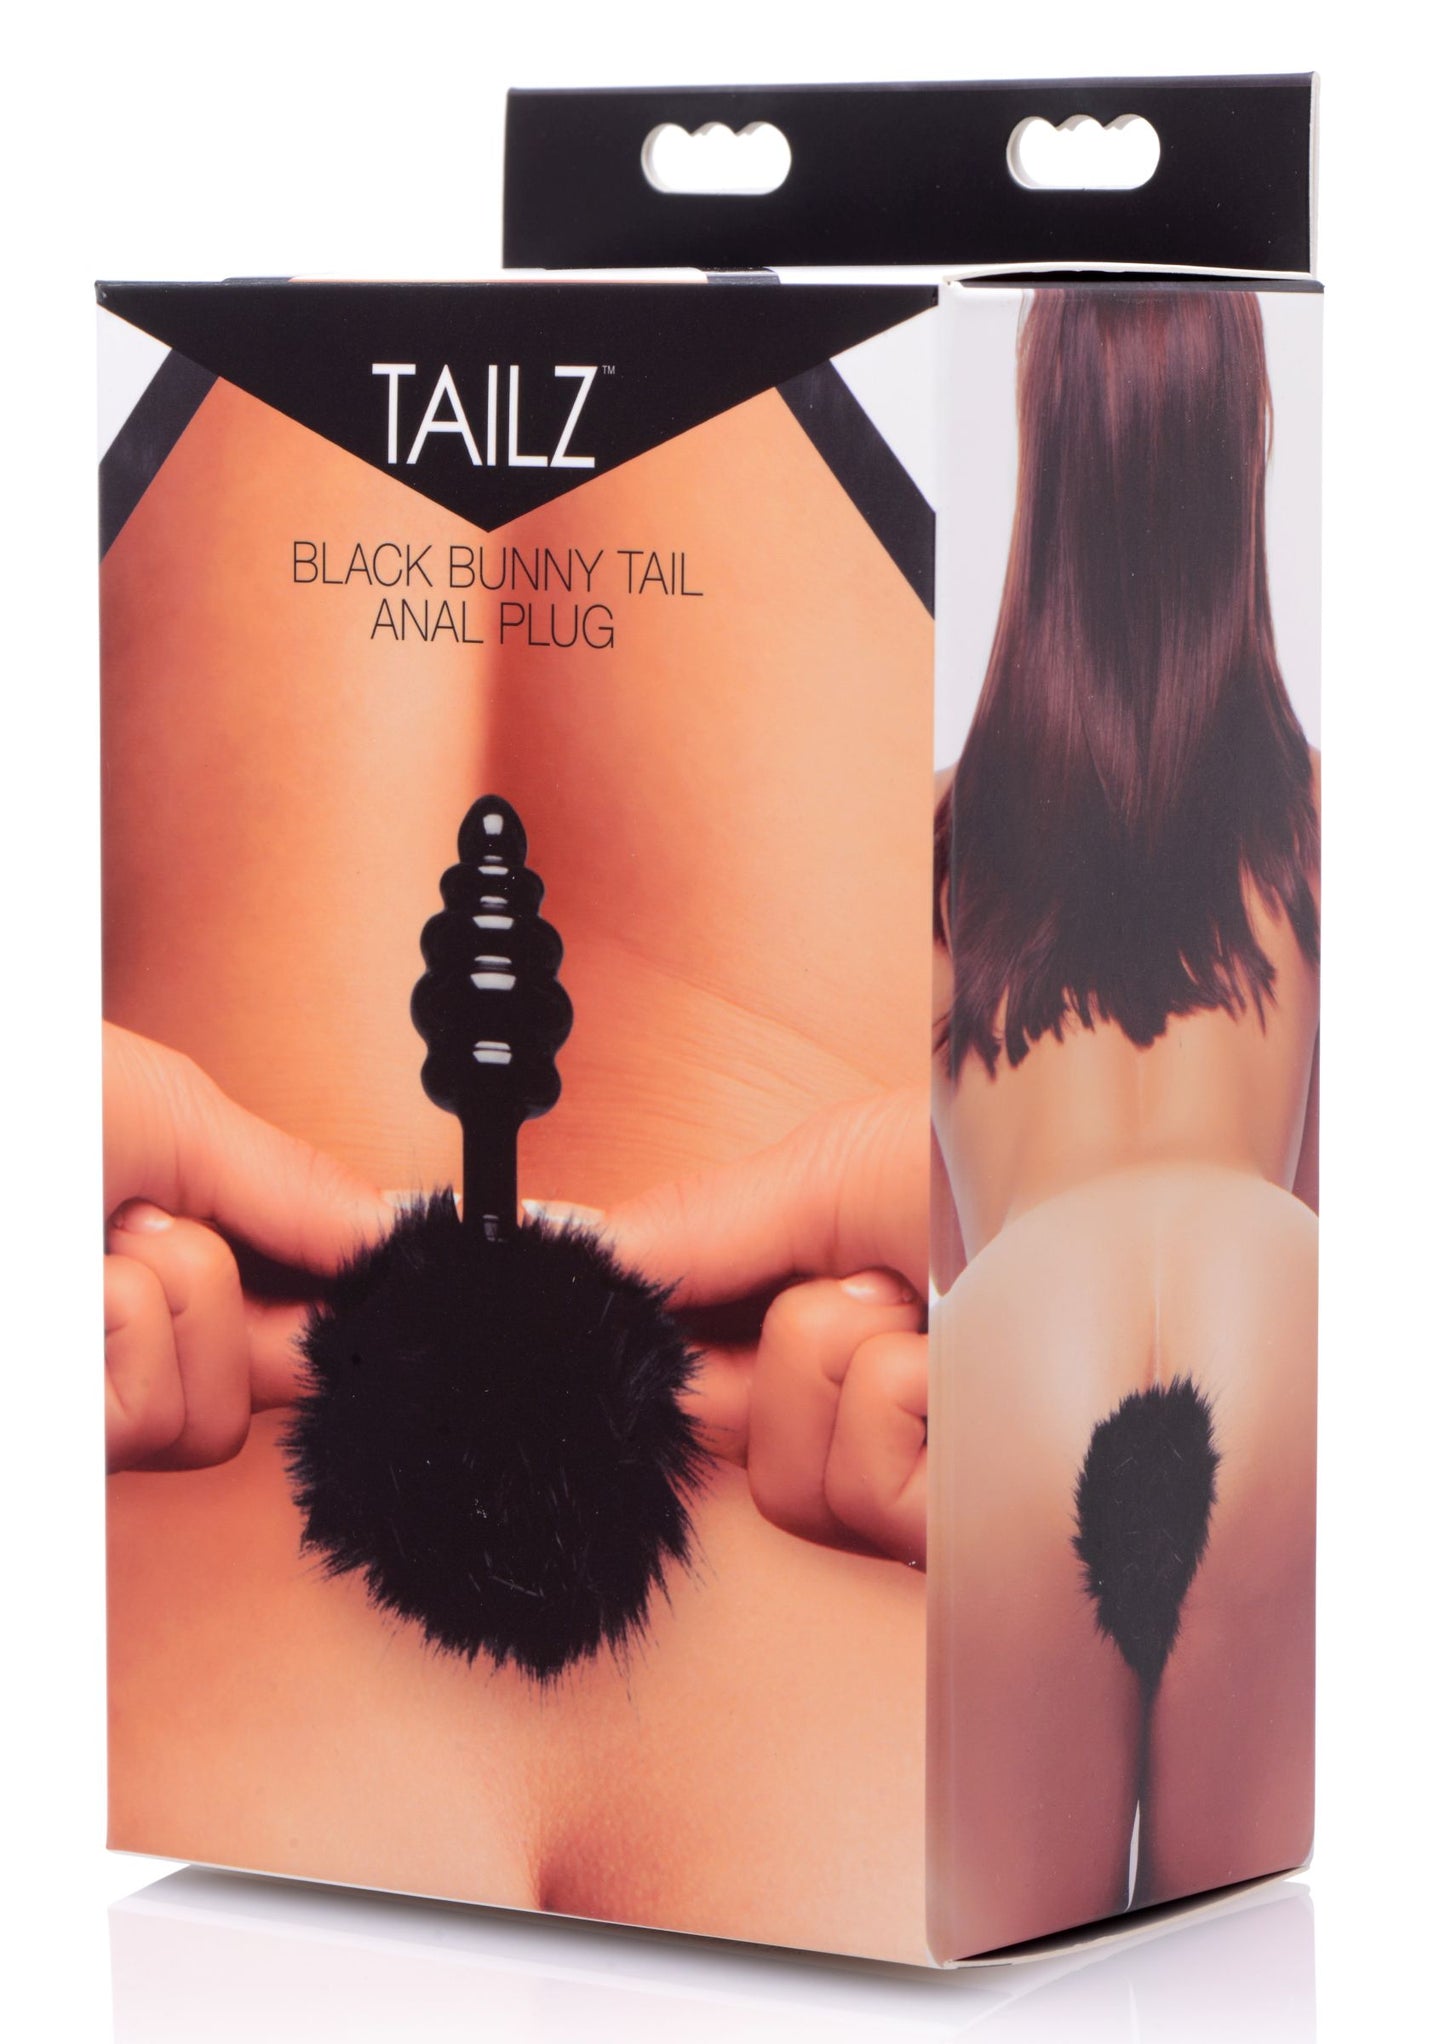 Black Bunny Tail Anal Plug - Just for you desires